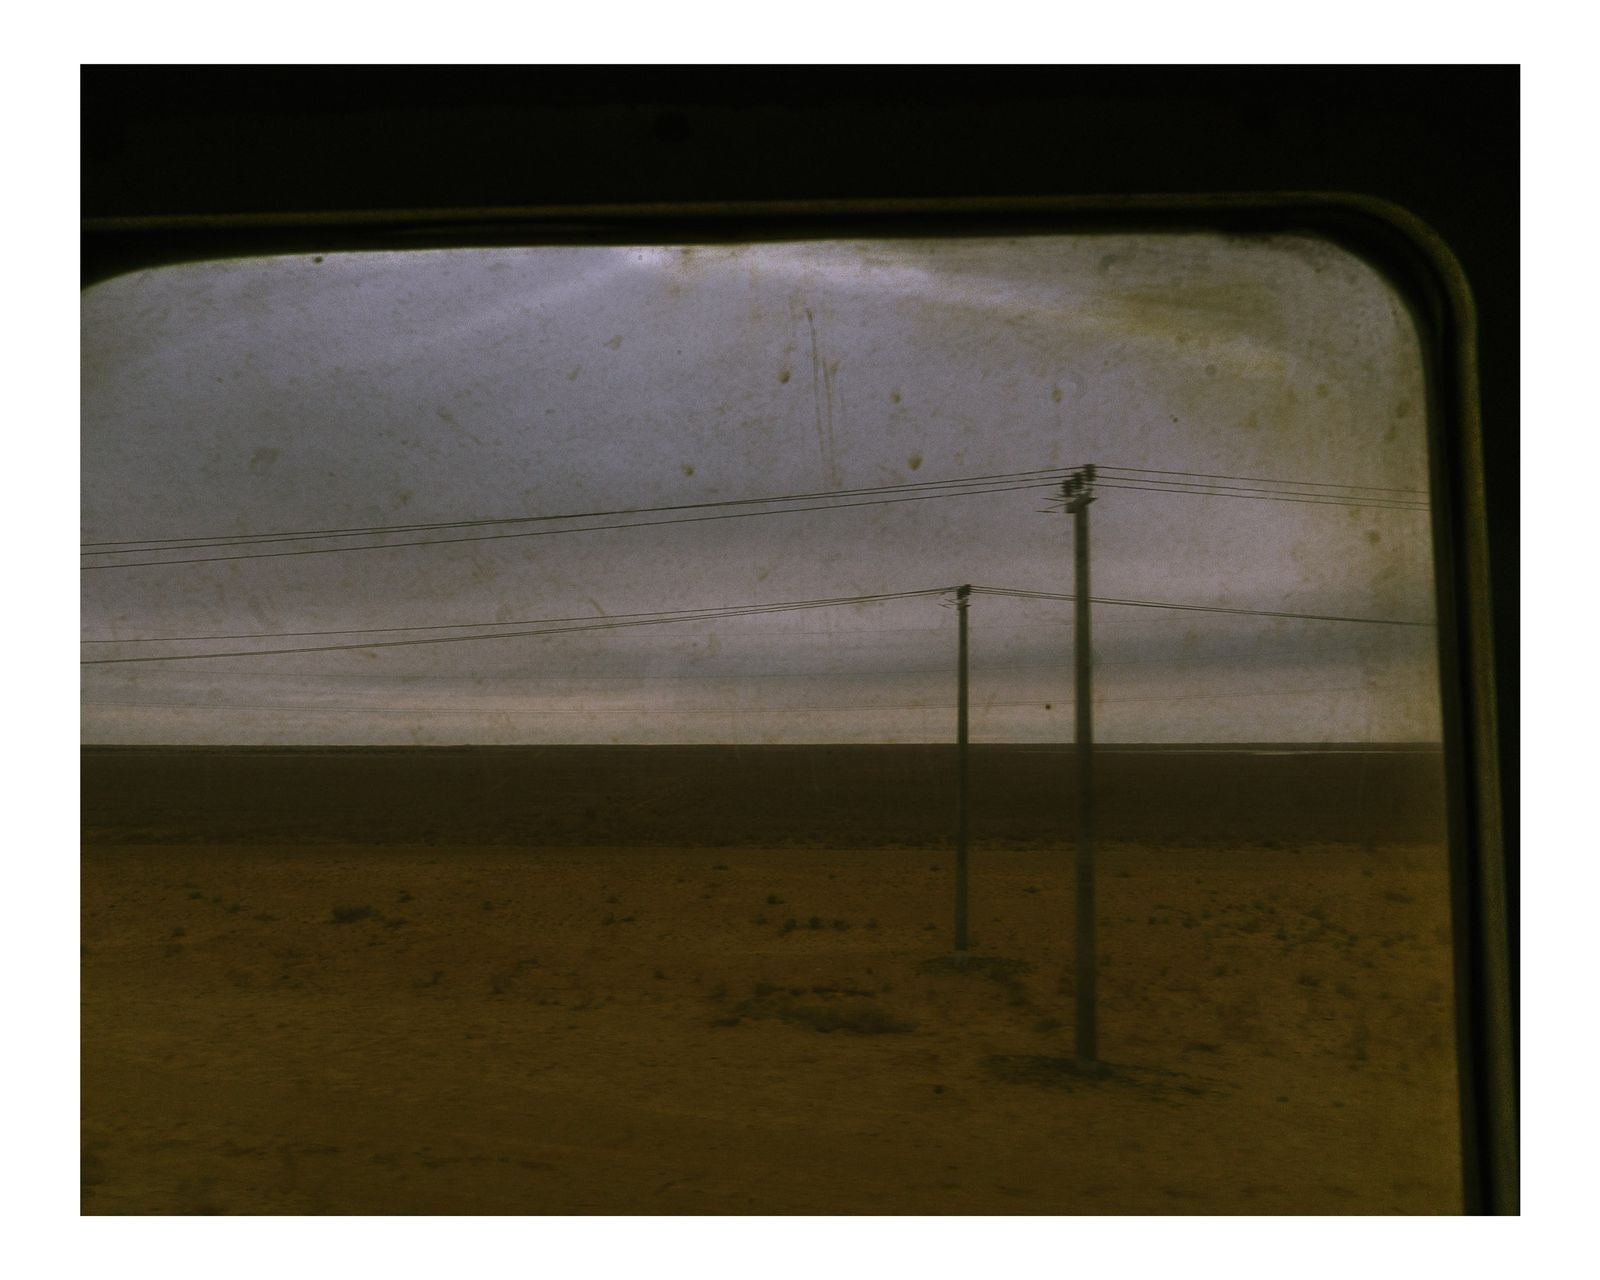 © Davide Monteleone - Image from the A NEW SILK ROAD photography project